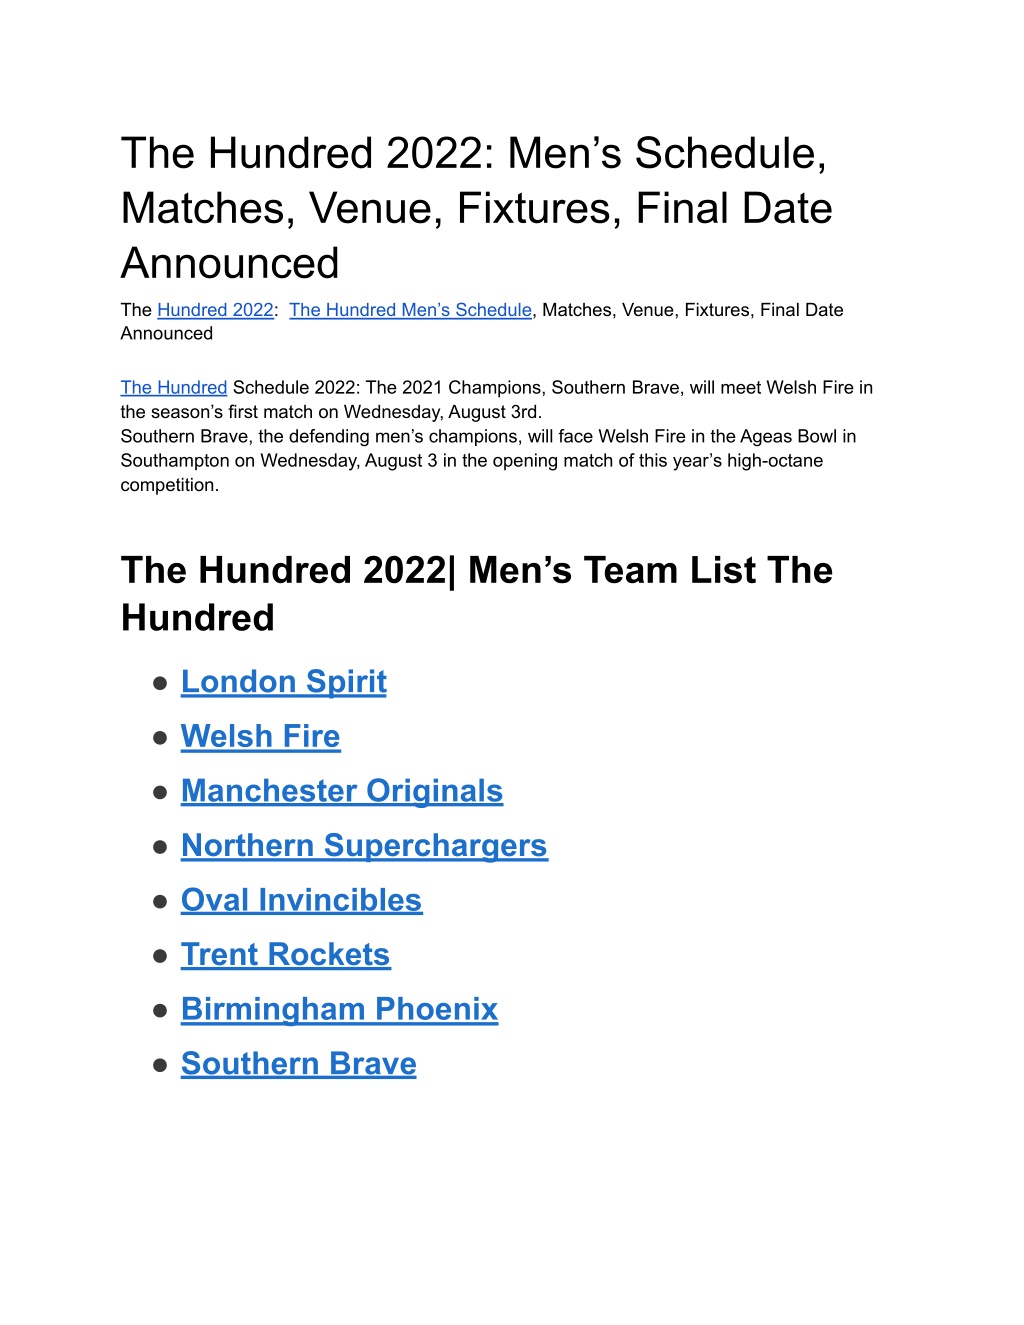 Ppt The Hundred 2022 Mens Schedule Matches Venue Fixtures Final Date Announced 1987